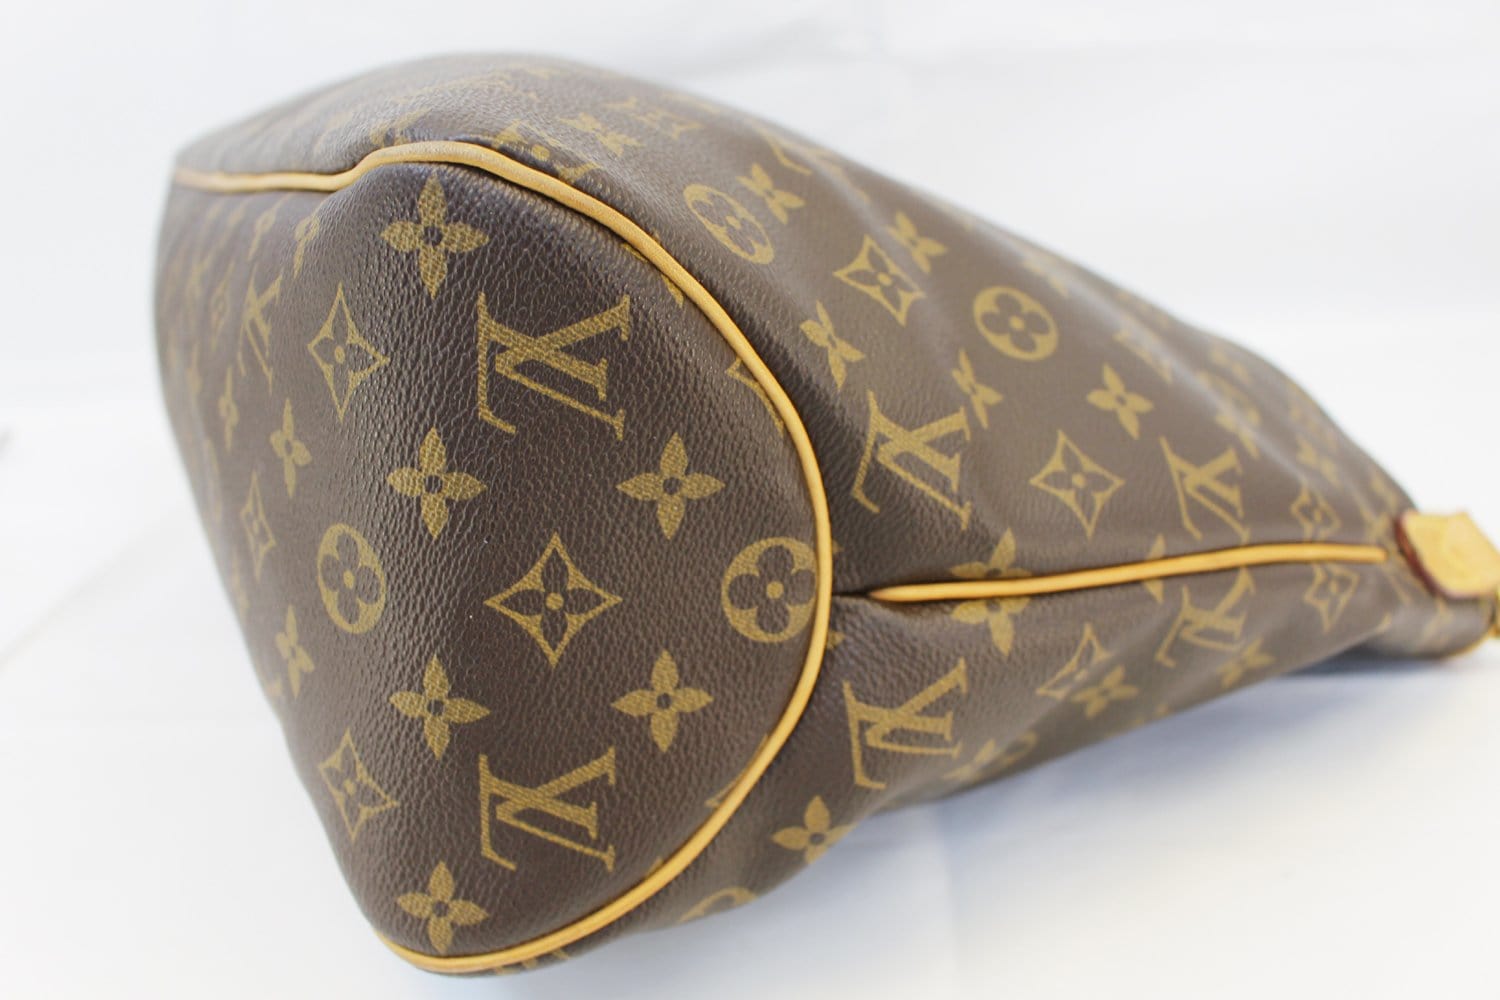 Auth Louis Vuitton Delightful MM Monogram M40353 Opening Leather Damaged  LD517